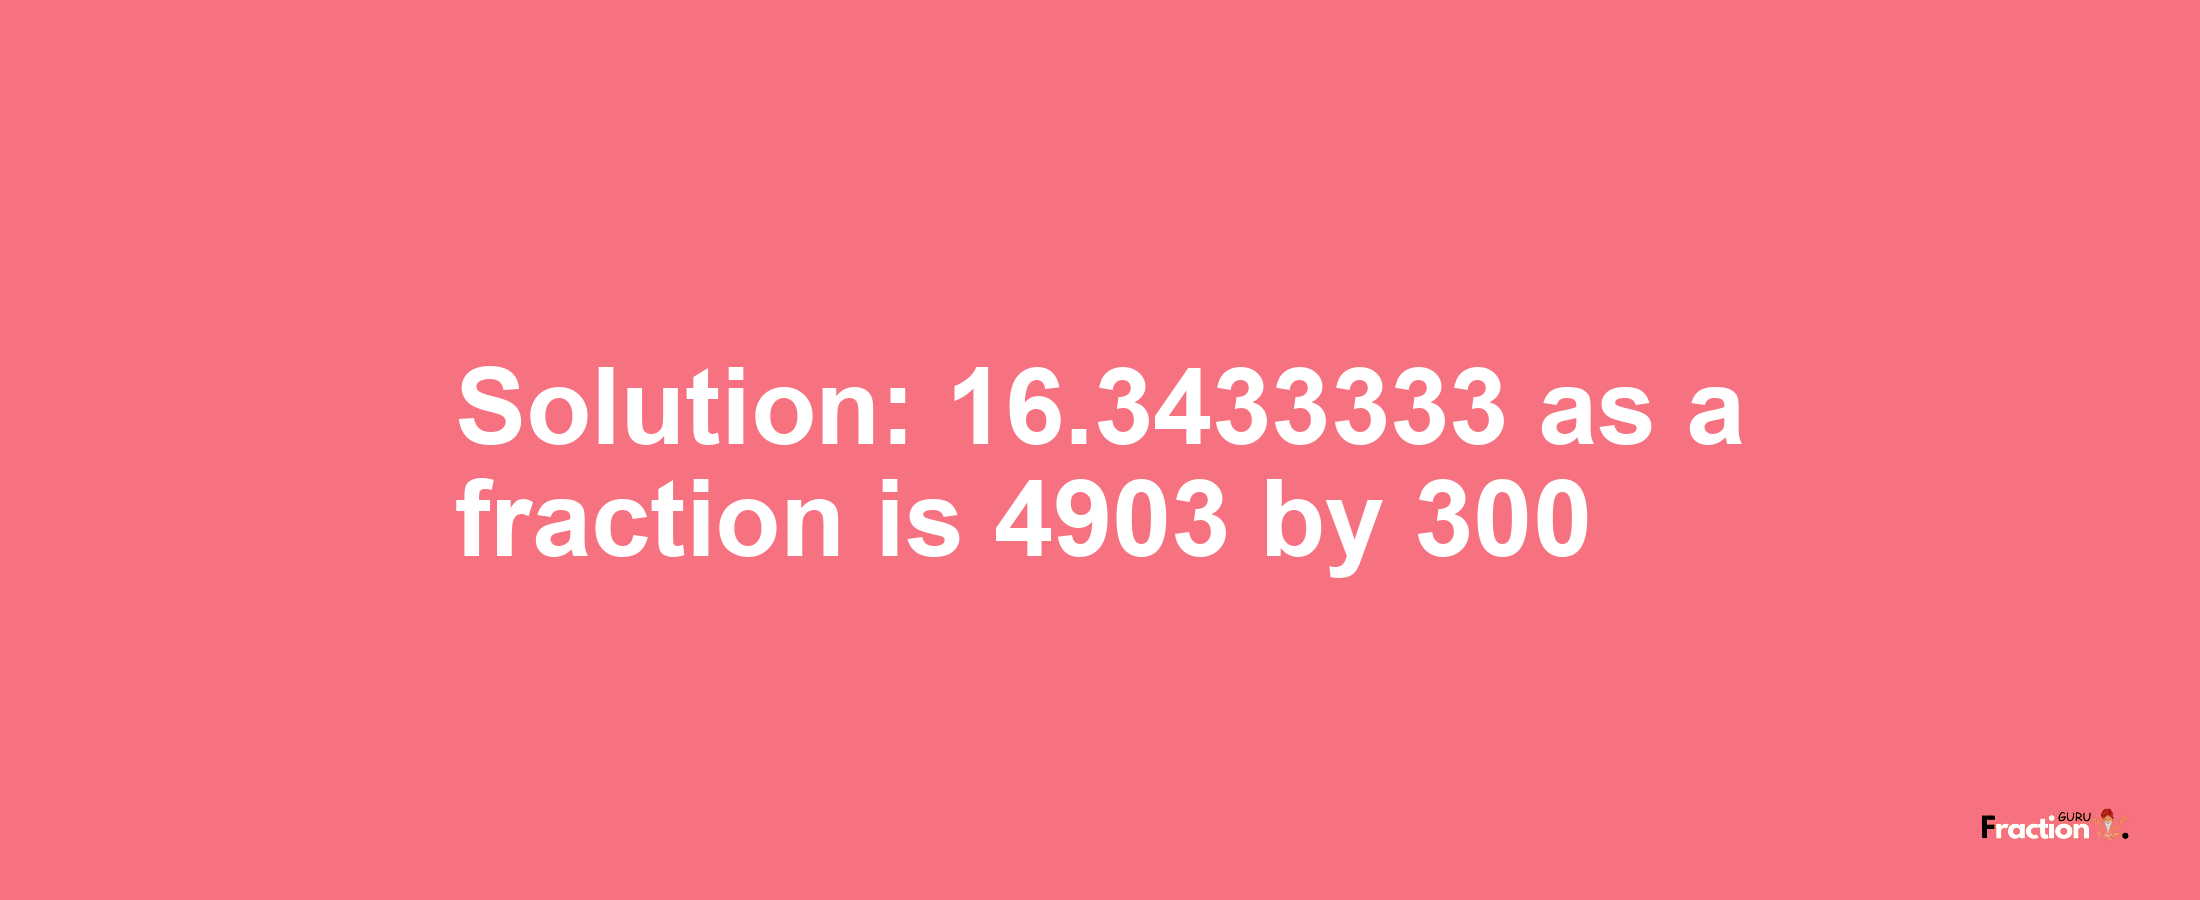 Solution:16.3433333 as a fraction is 4903/300